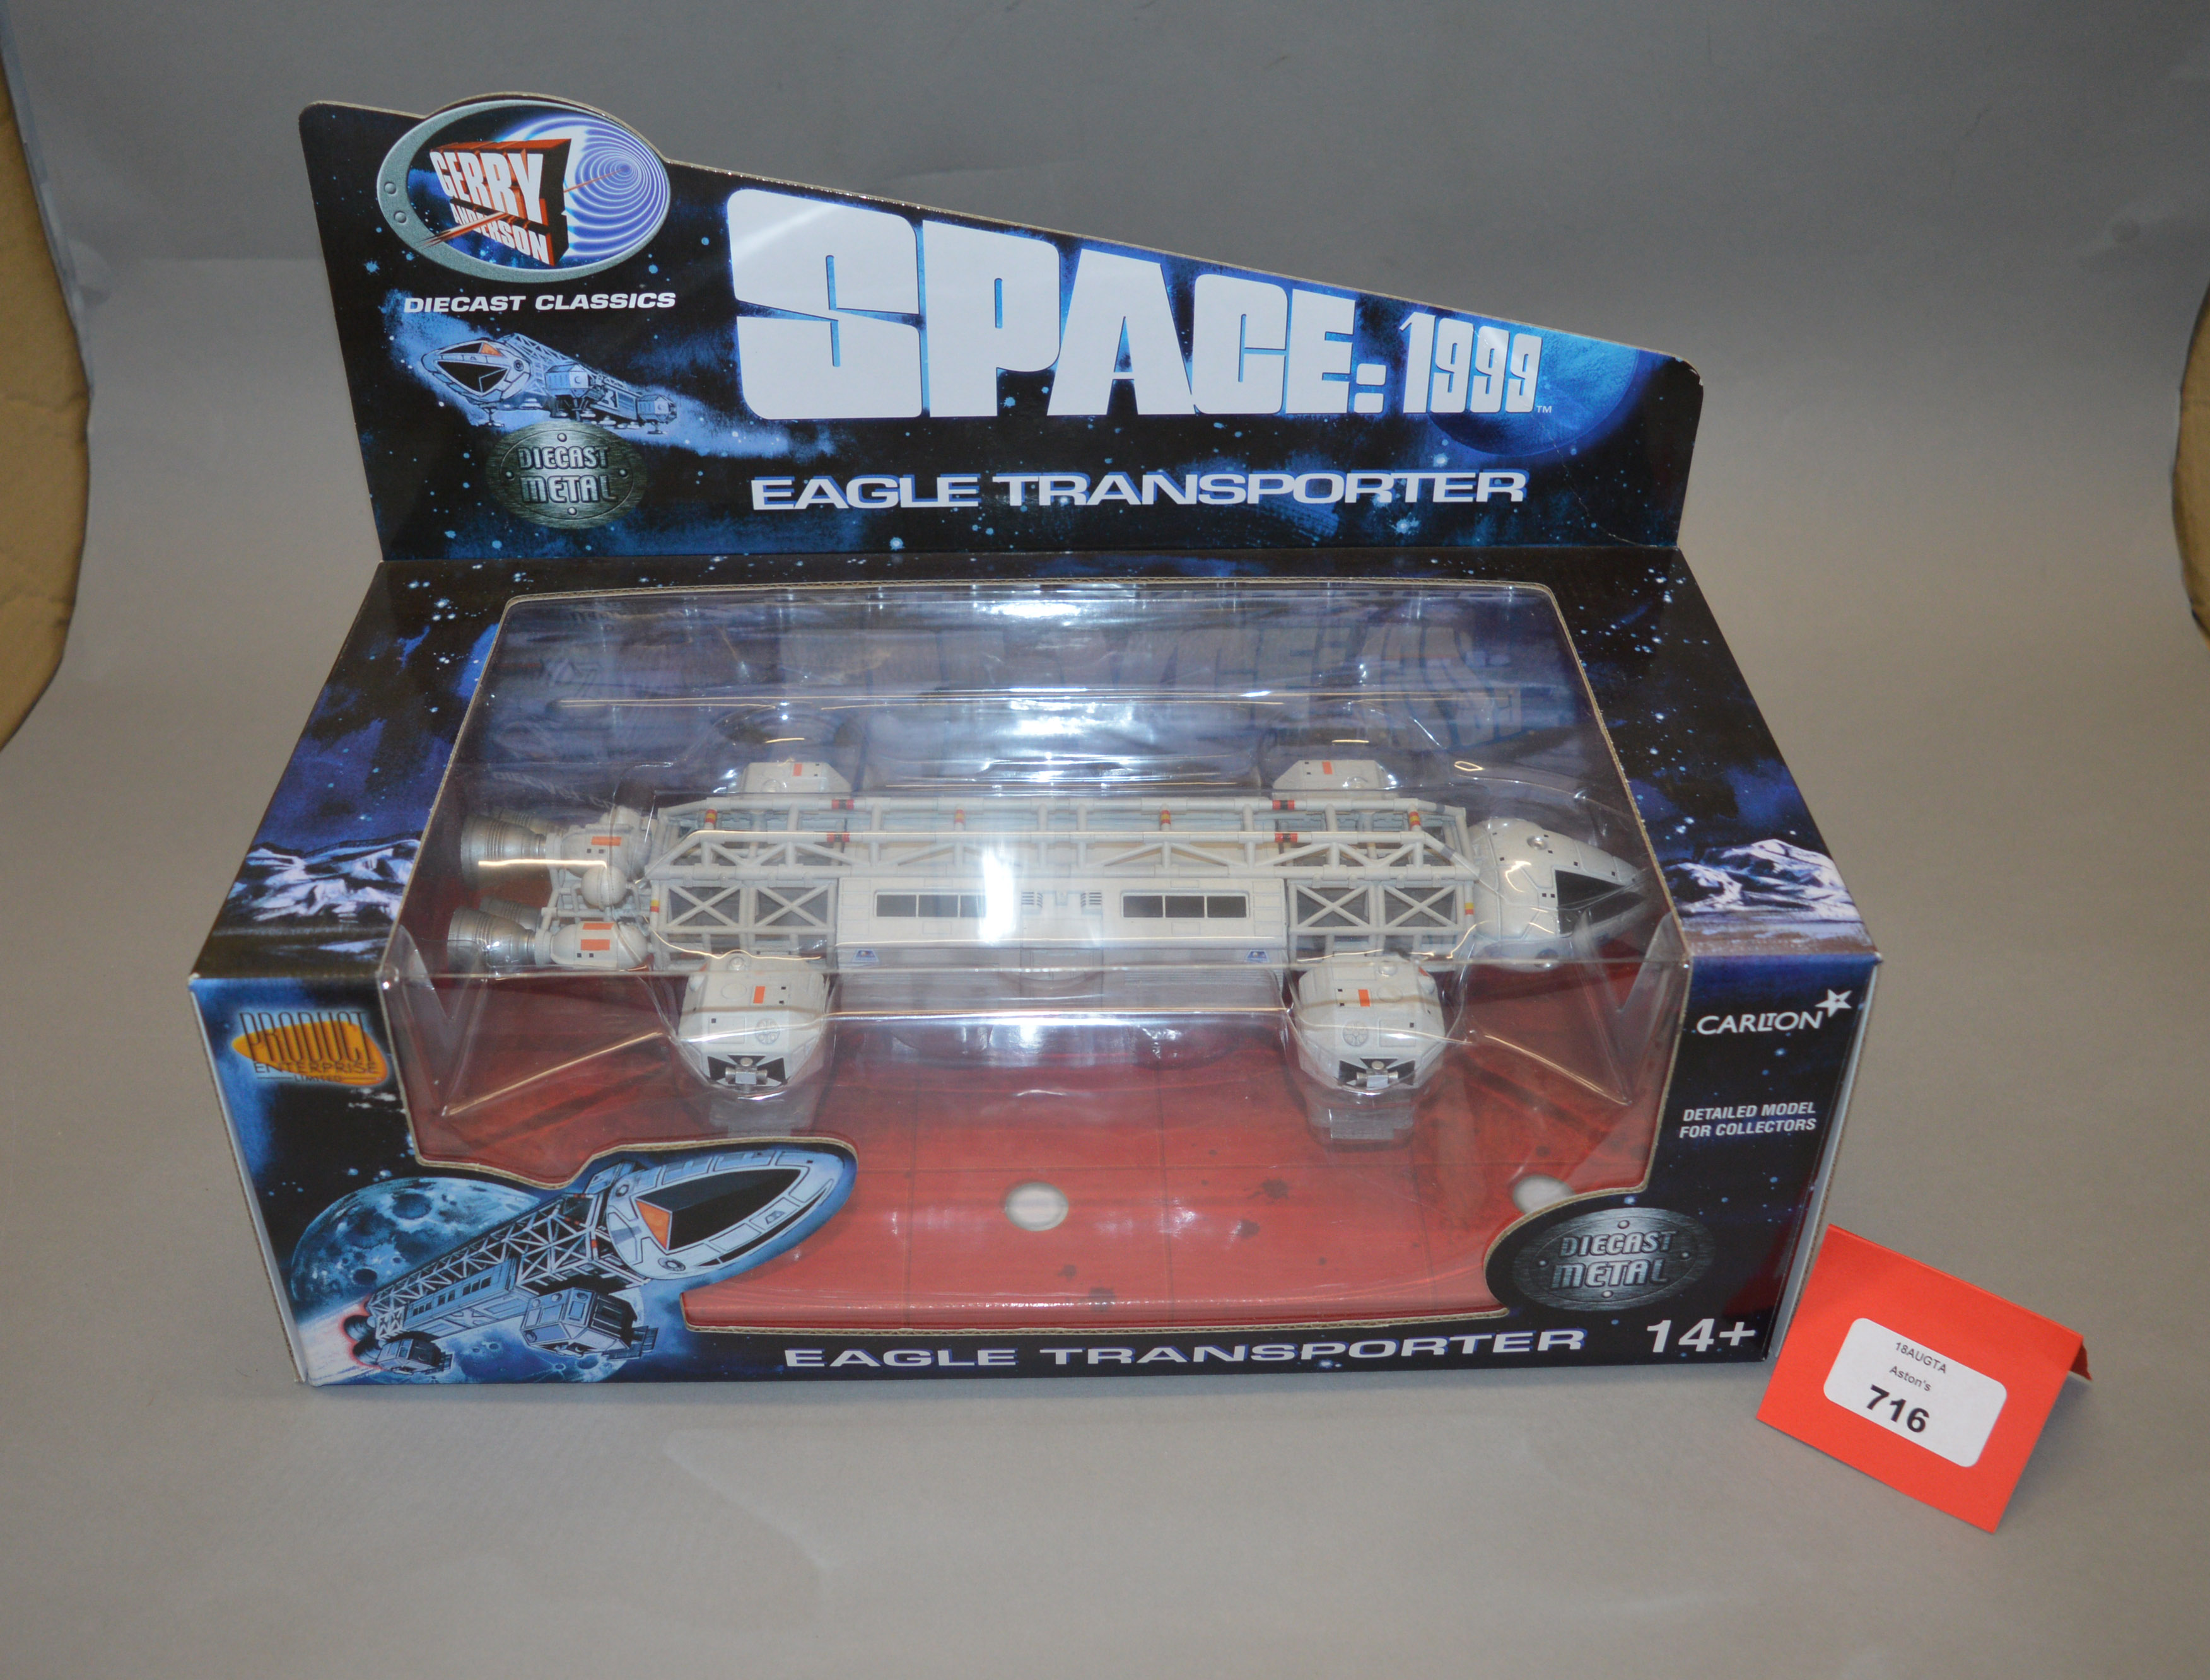 A boxed 'Product Enterprise' diecast 'Space 1999' related model of an Eagle Transporter,